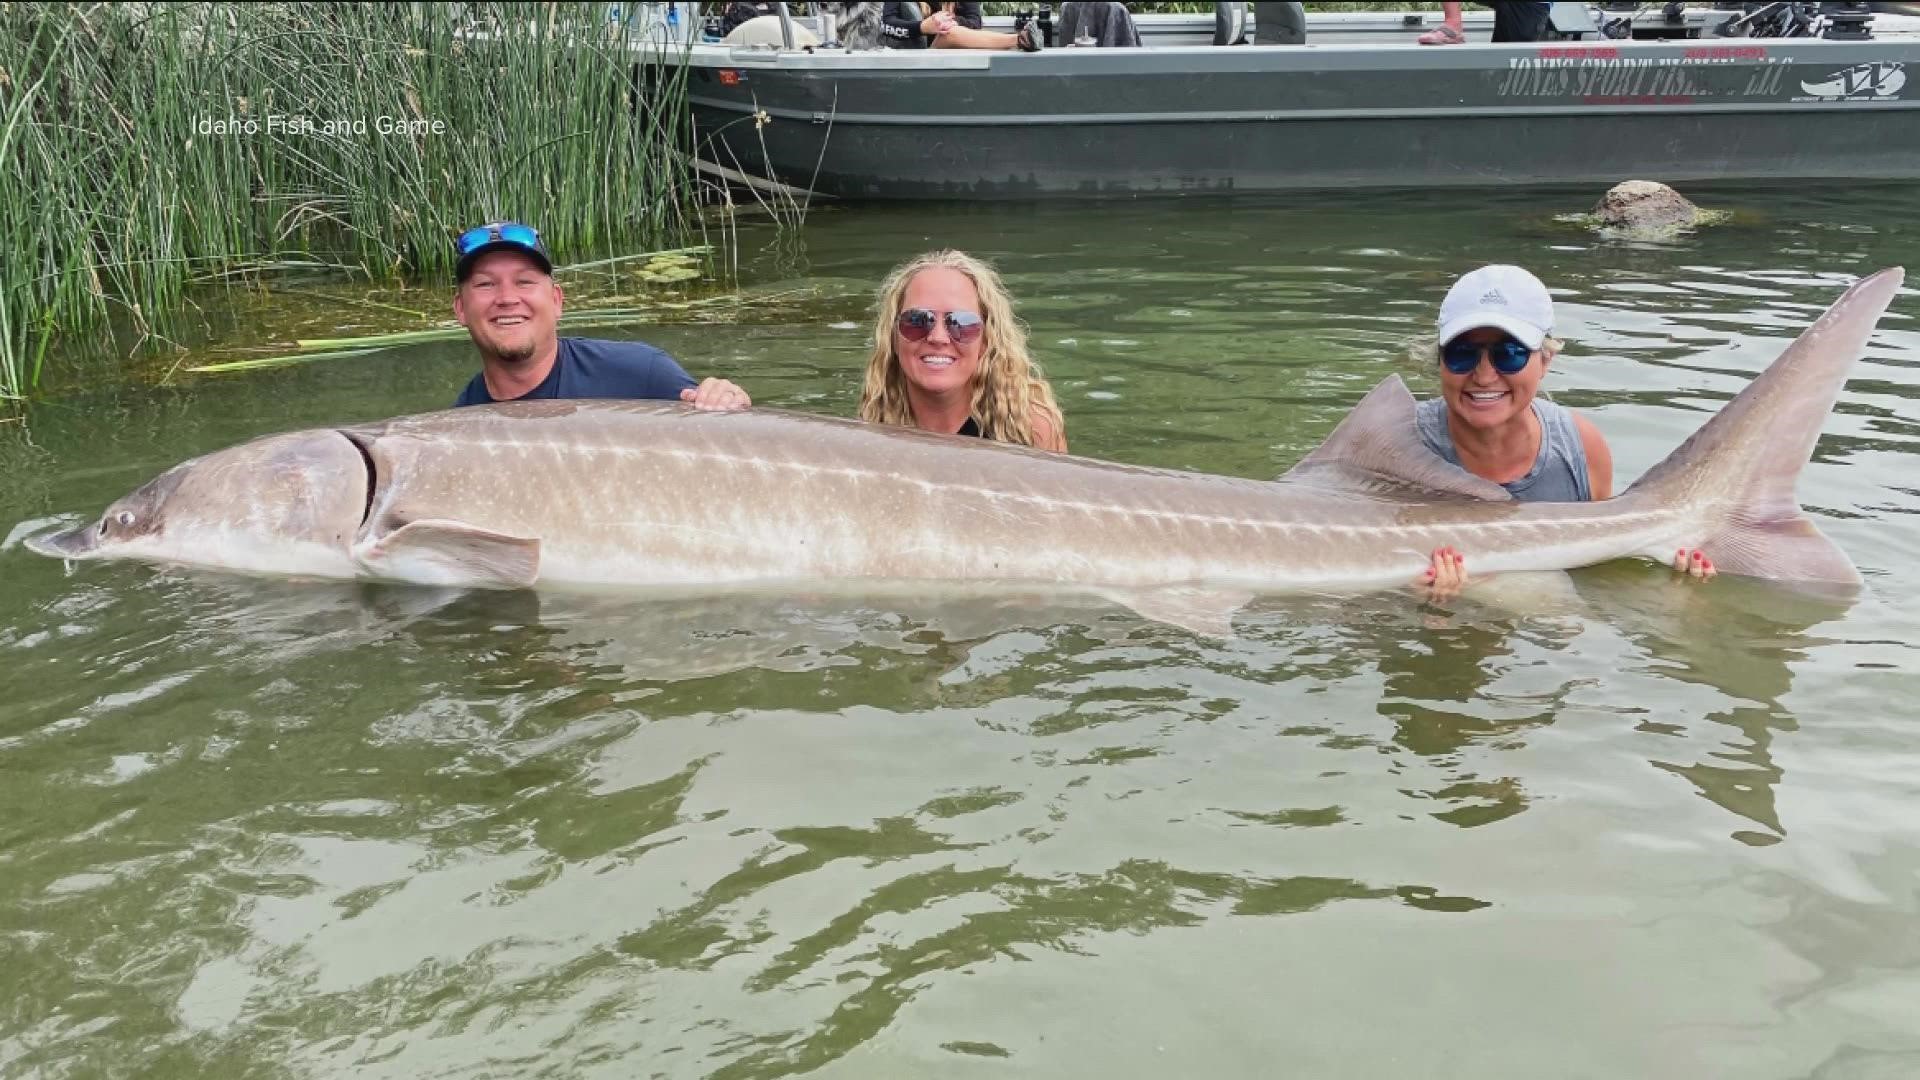 Greg and Angie Poulsen's trip from Eagle Mountain, Utah was certainly worth it after Greg hooked a 10-foot, 4-inch white sturgeon on August 5.